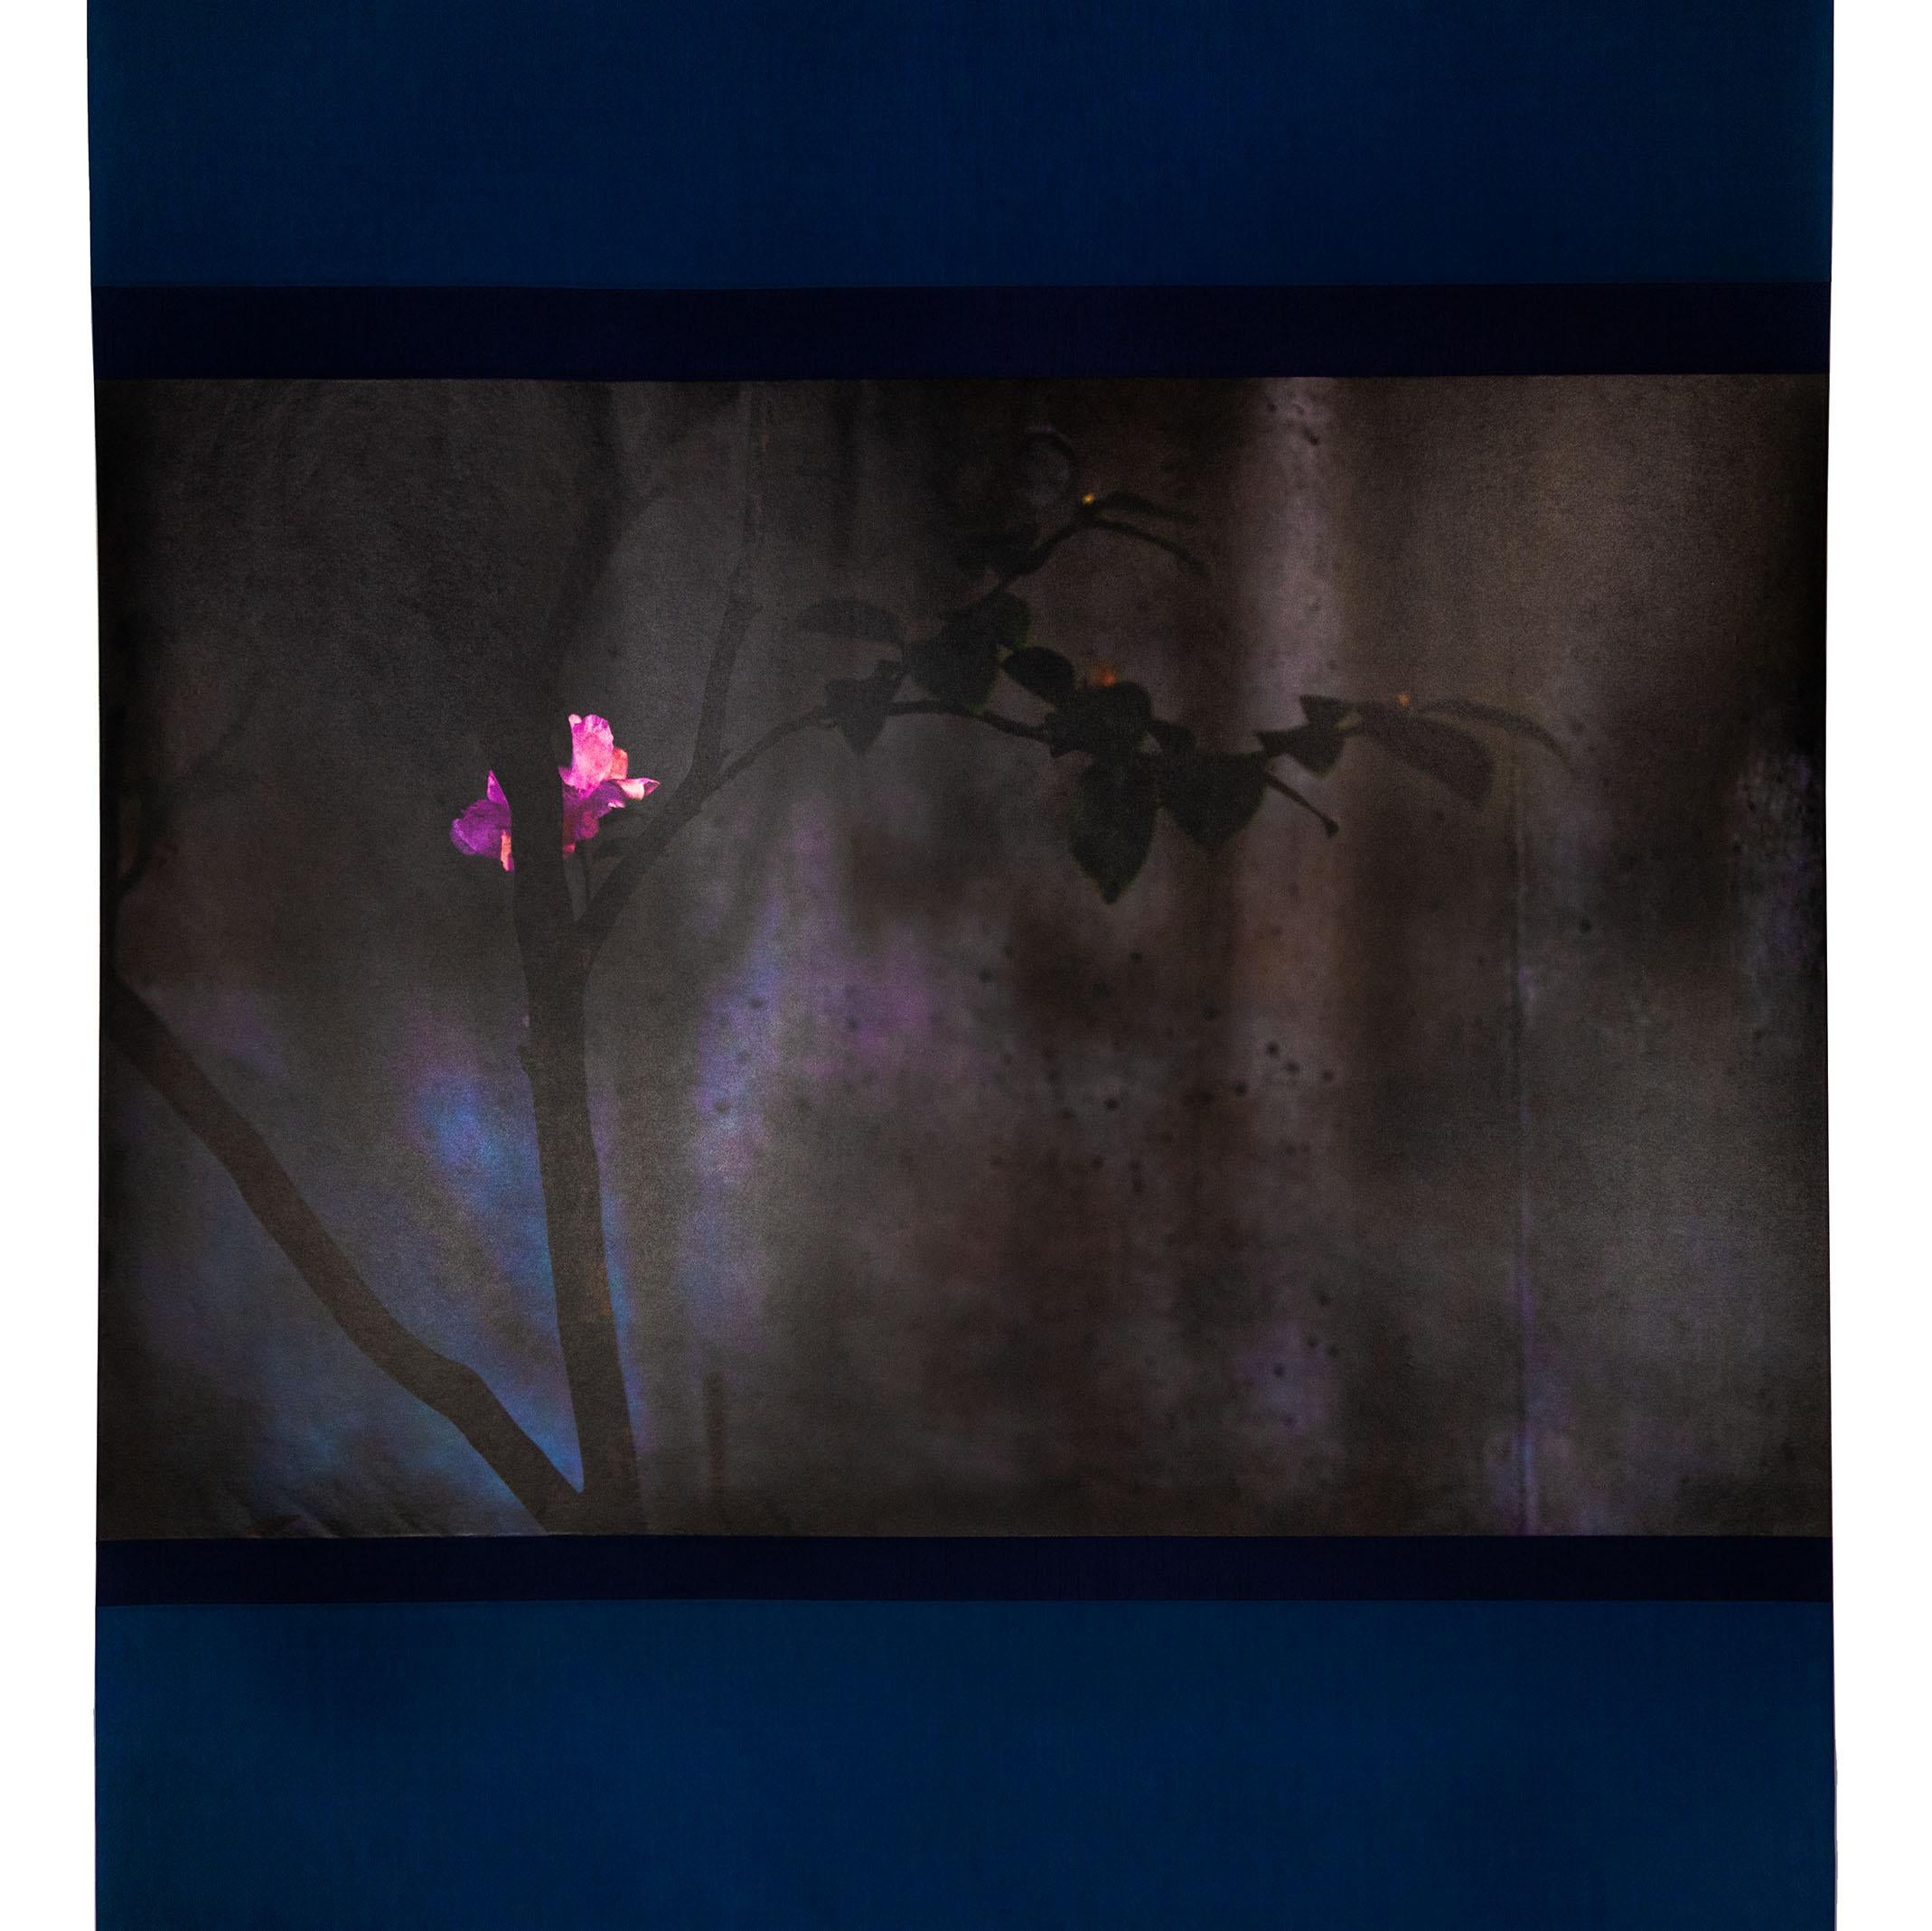 UV print of digital photograph on Kakejikuya 100% kozo paper mulberry washi, mounted in fabric scroll

Kojun is an self-taught multimédia American artist born in 1977 based in Tokyo, Japan since 1999. Kojun project started in 2010 explores the